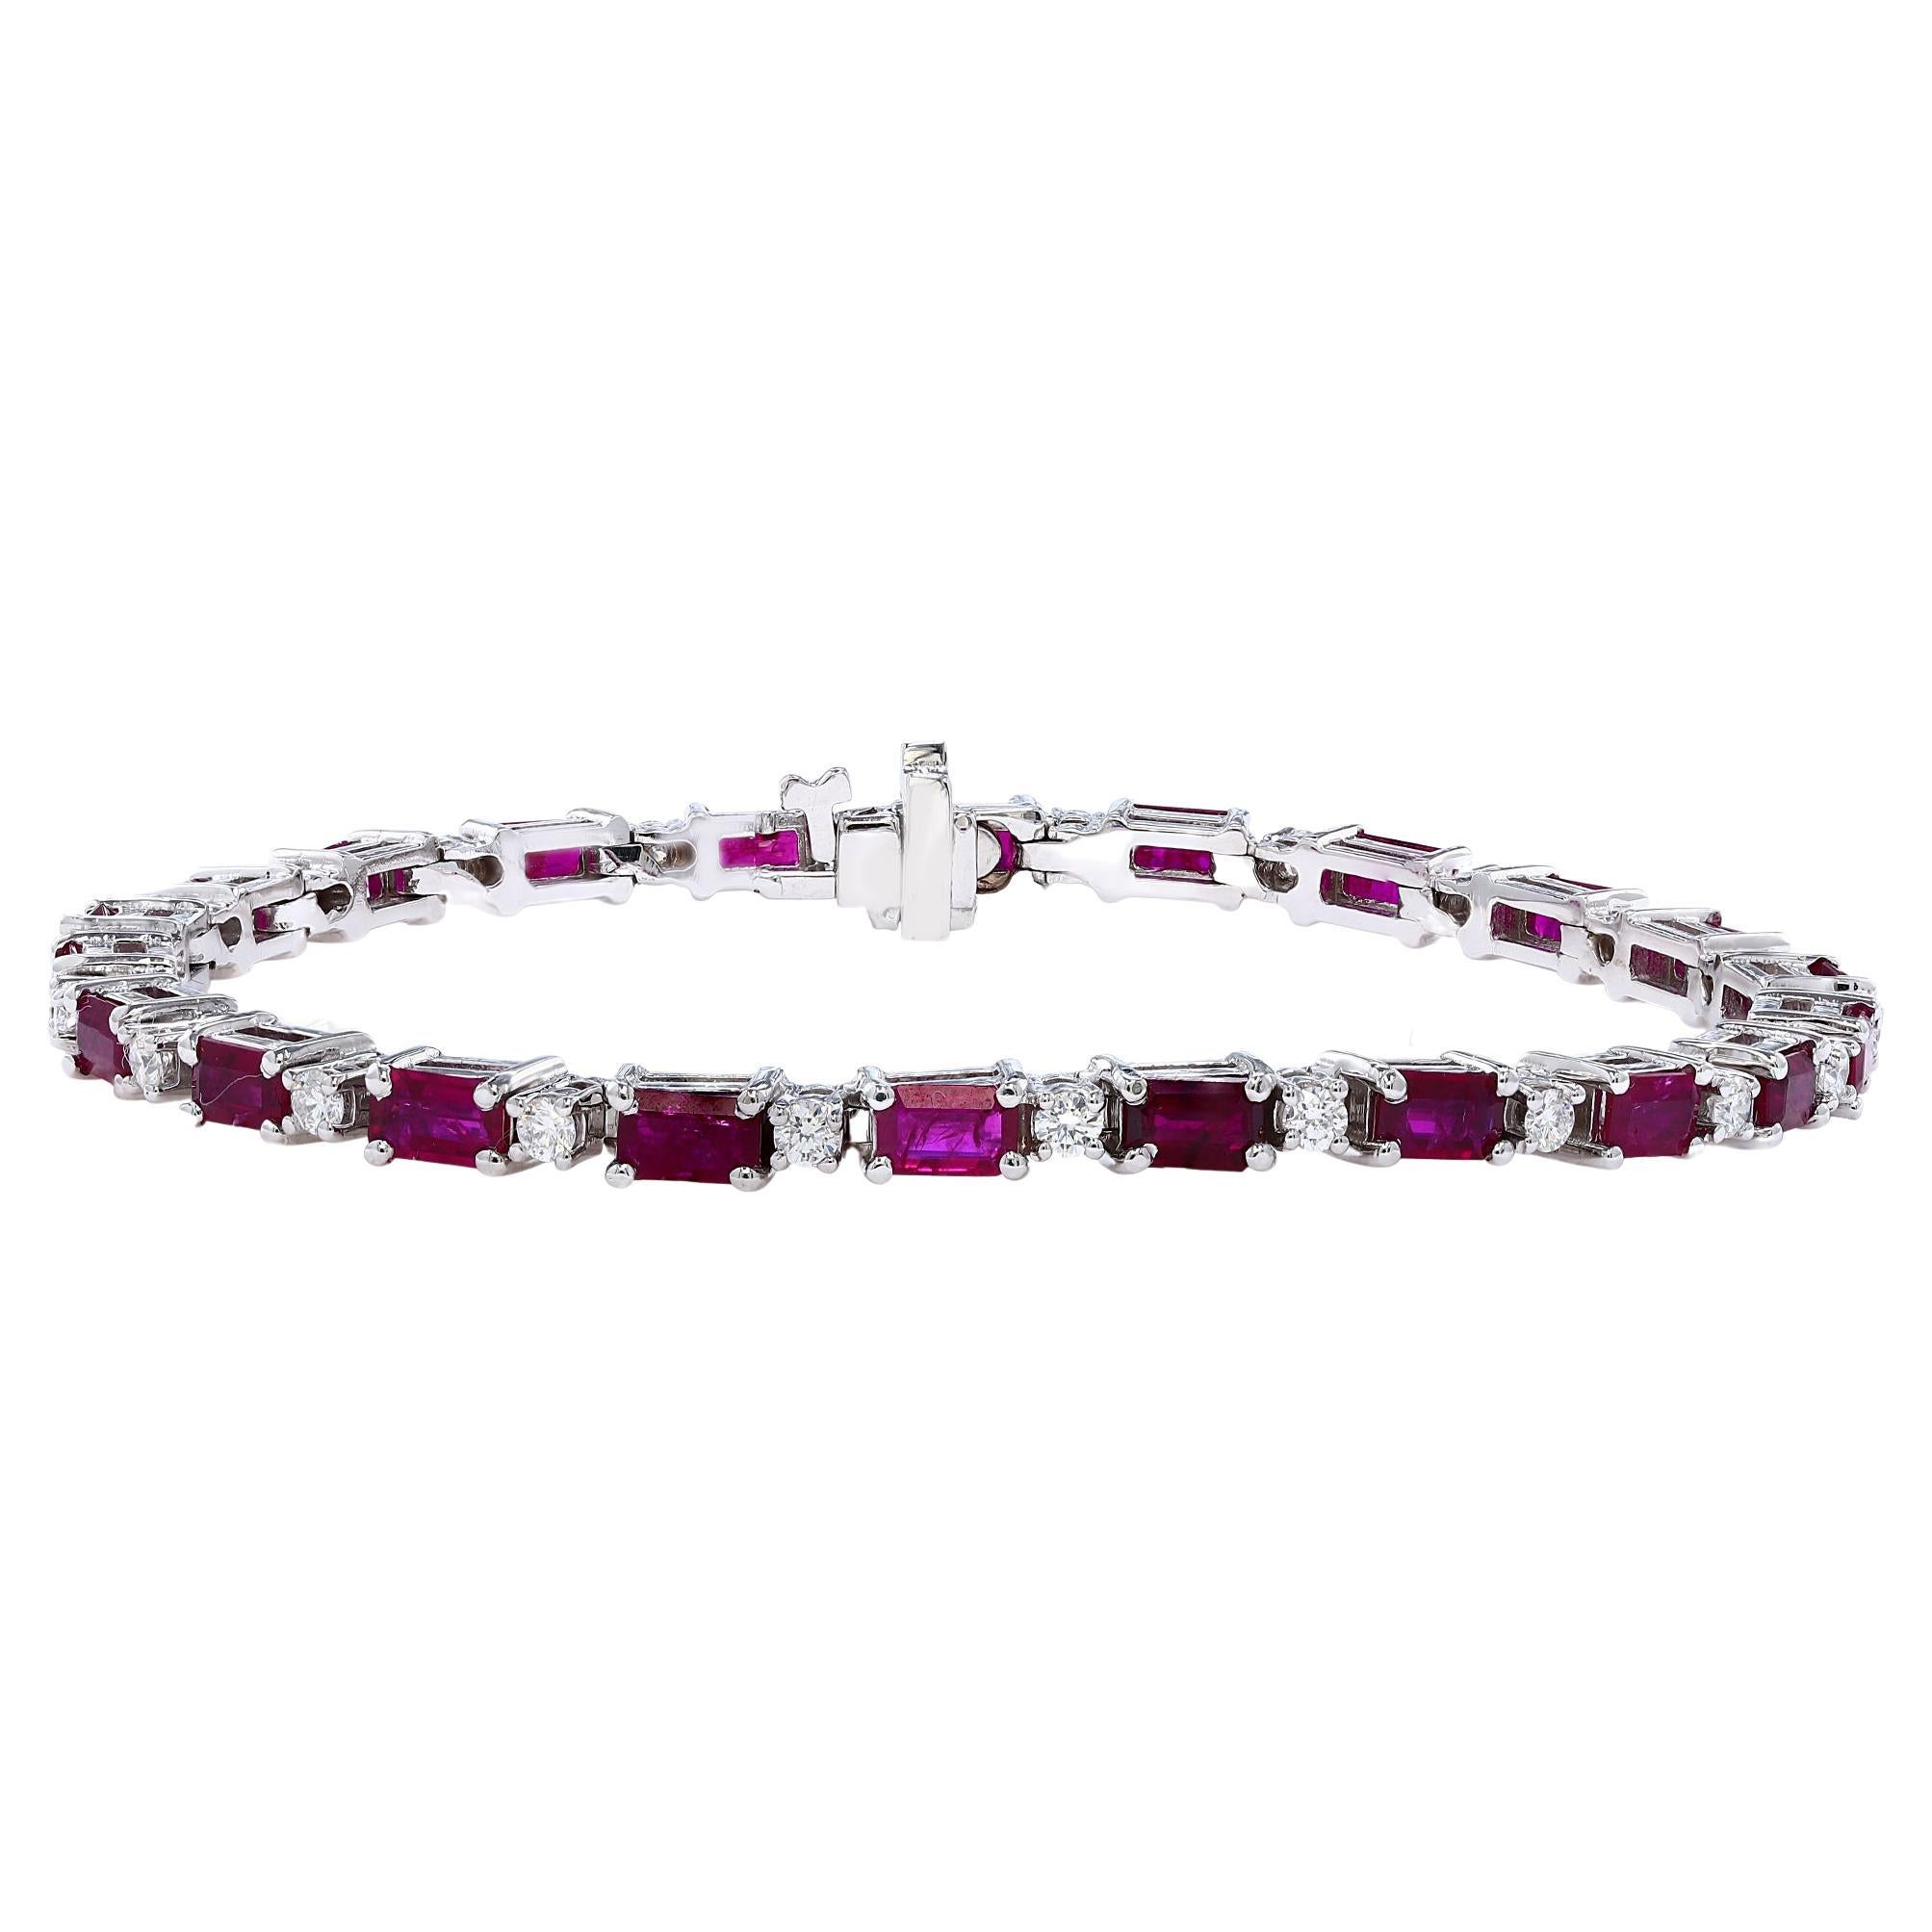 6.12 Carat Emerald Cut Ruby and Diamond Bracelet in 14K White Gold For Sale